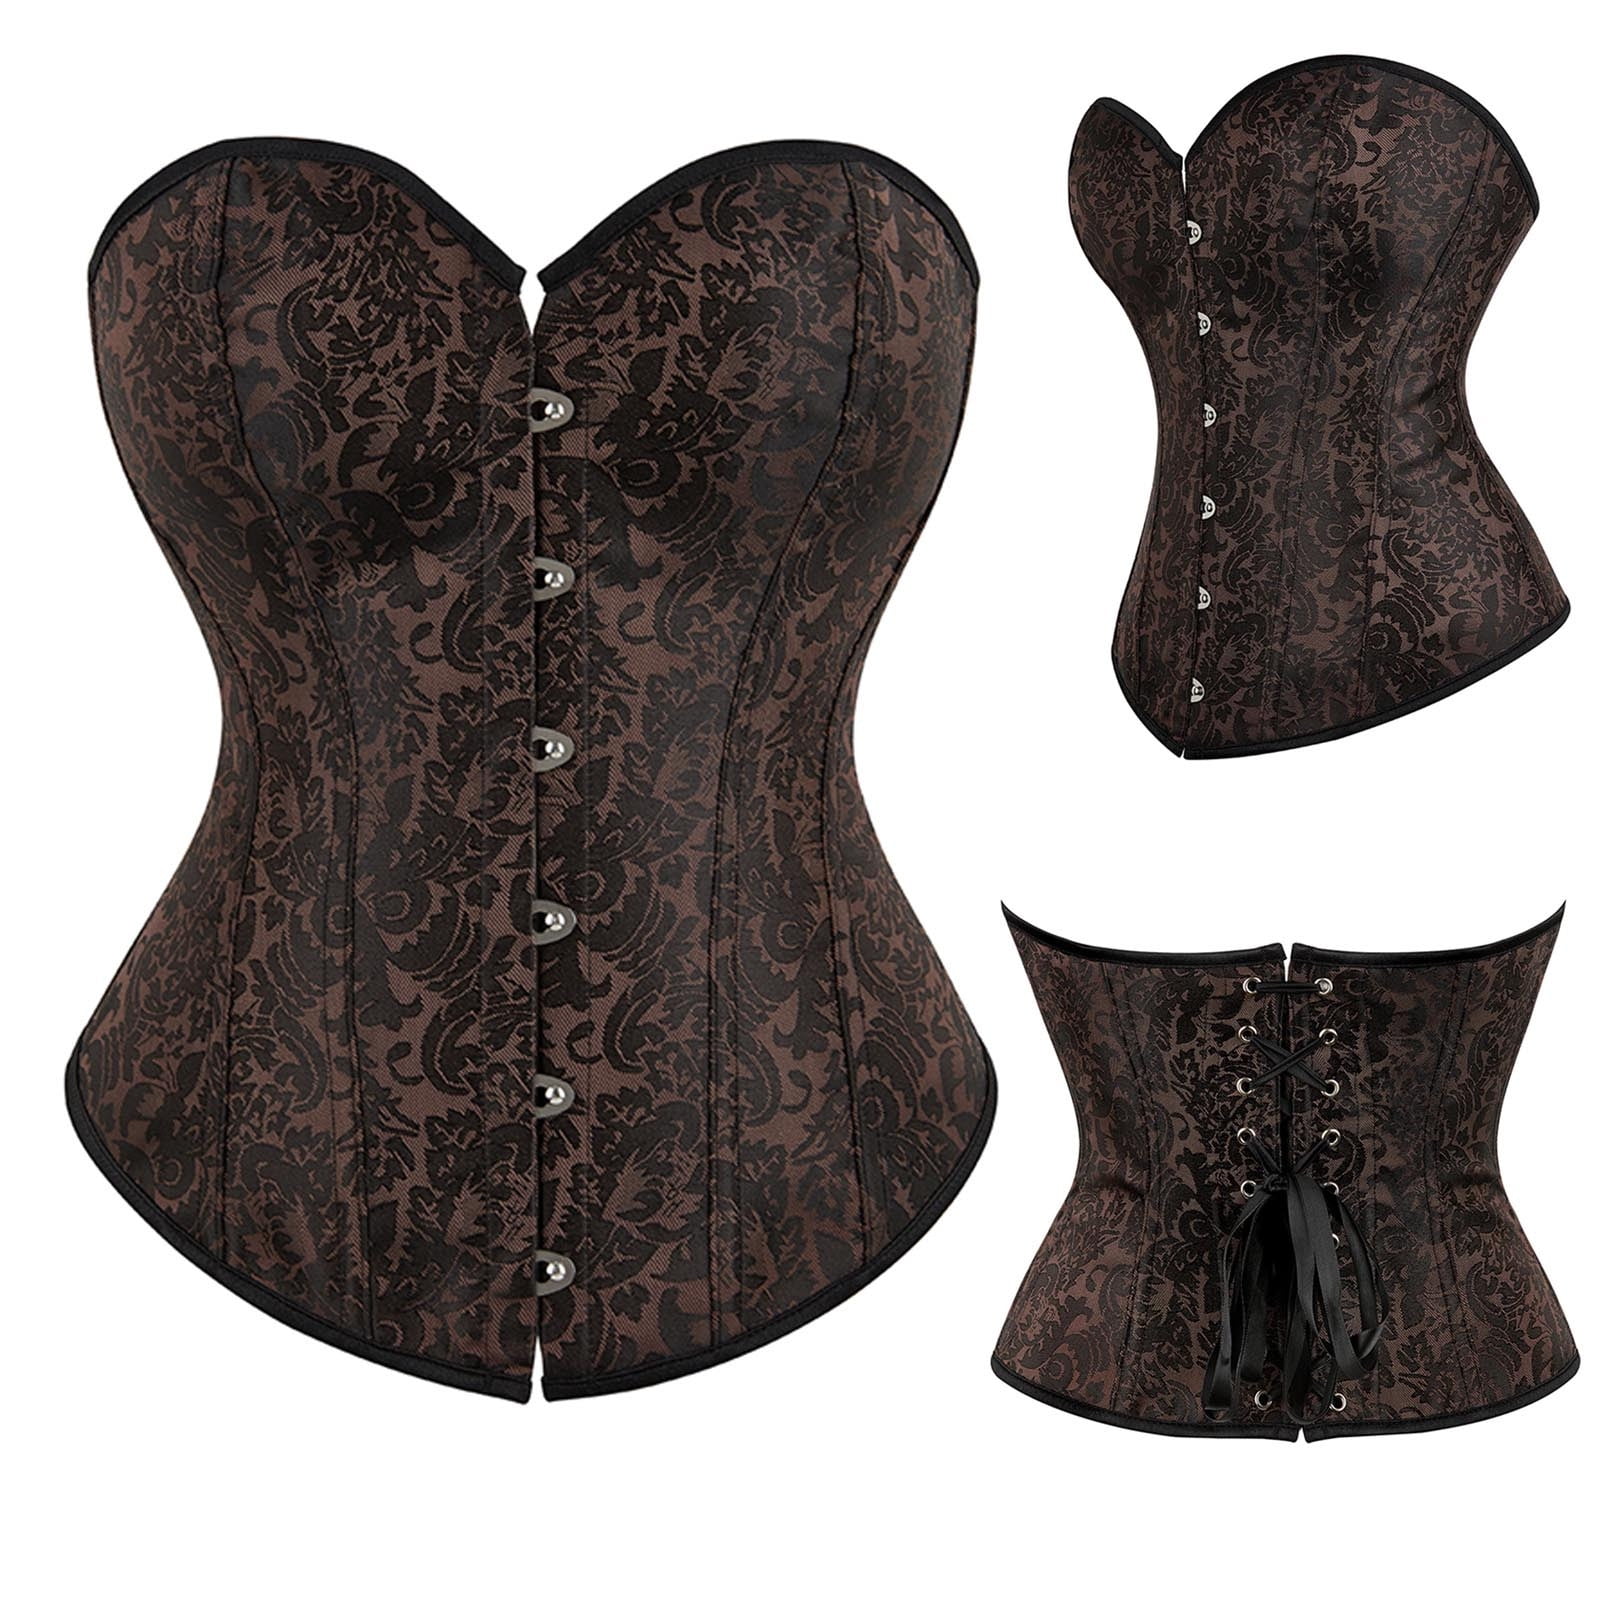 Aboser Steampunk Corset Tops for Women Lace Up Medieval Costume